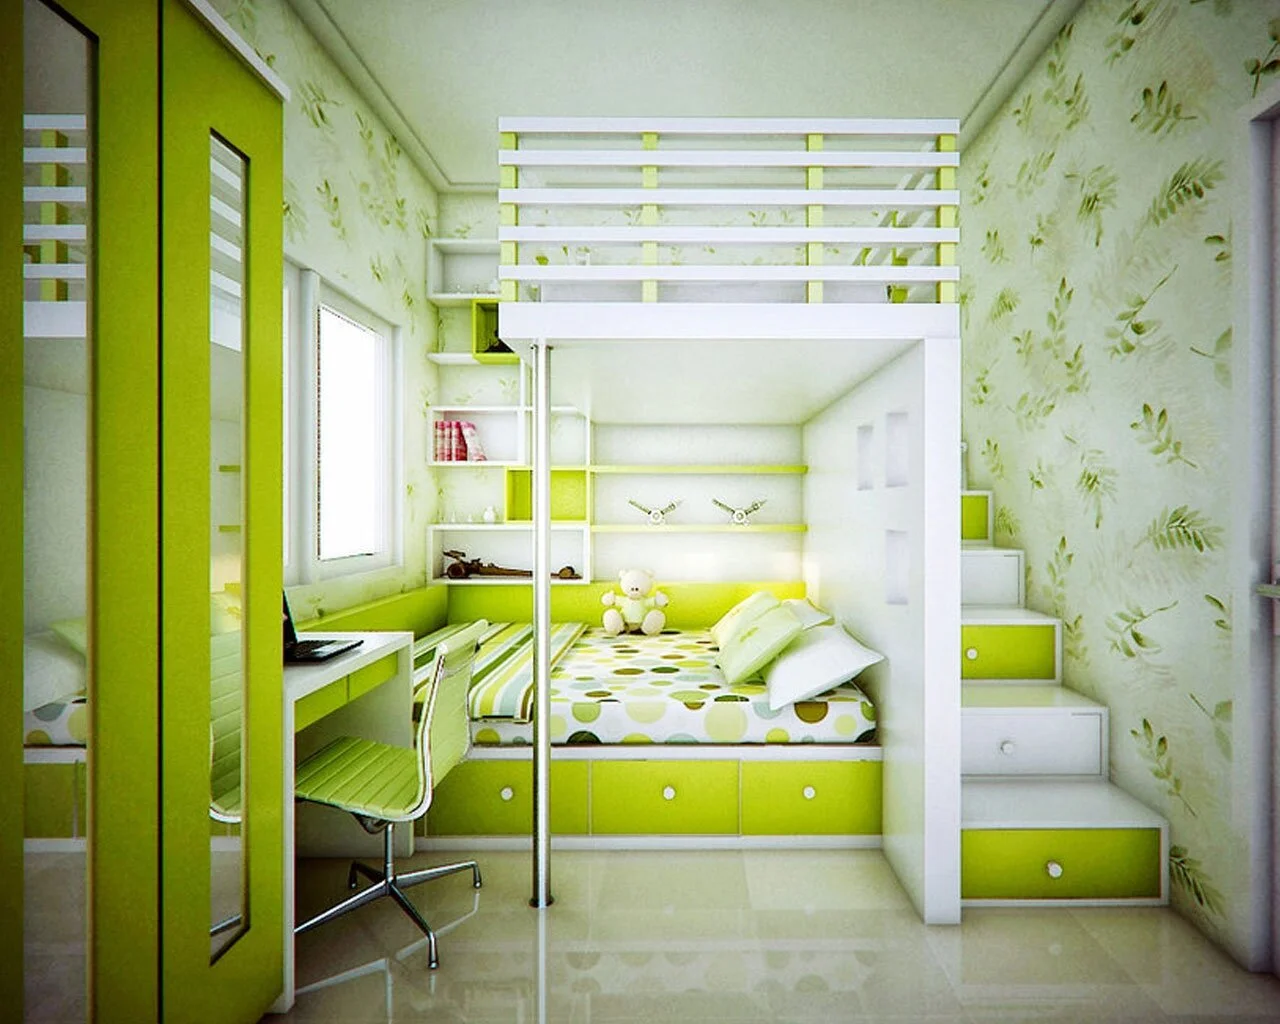 Beautiful Childrens Rooms Design Ideas For Home Pertaining To Children's Room Design Ideas